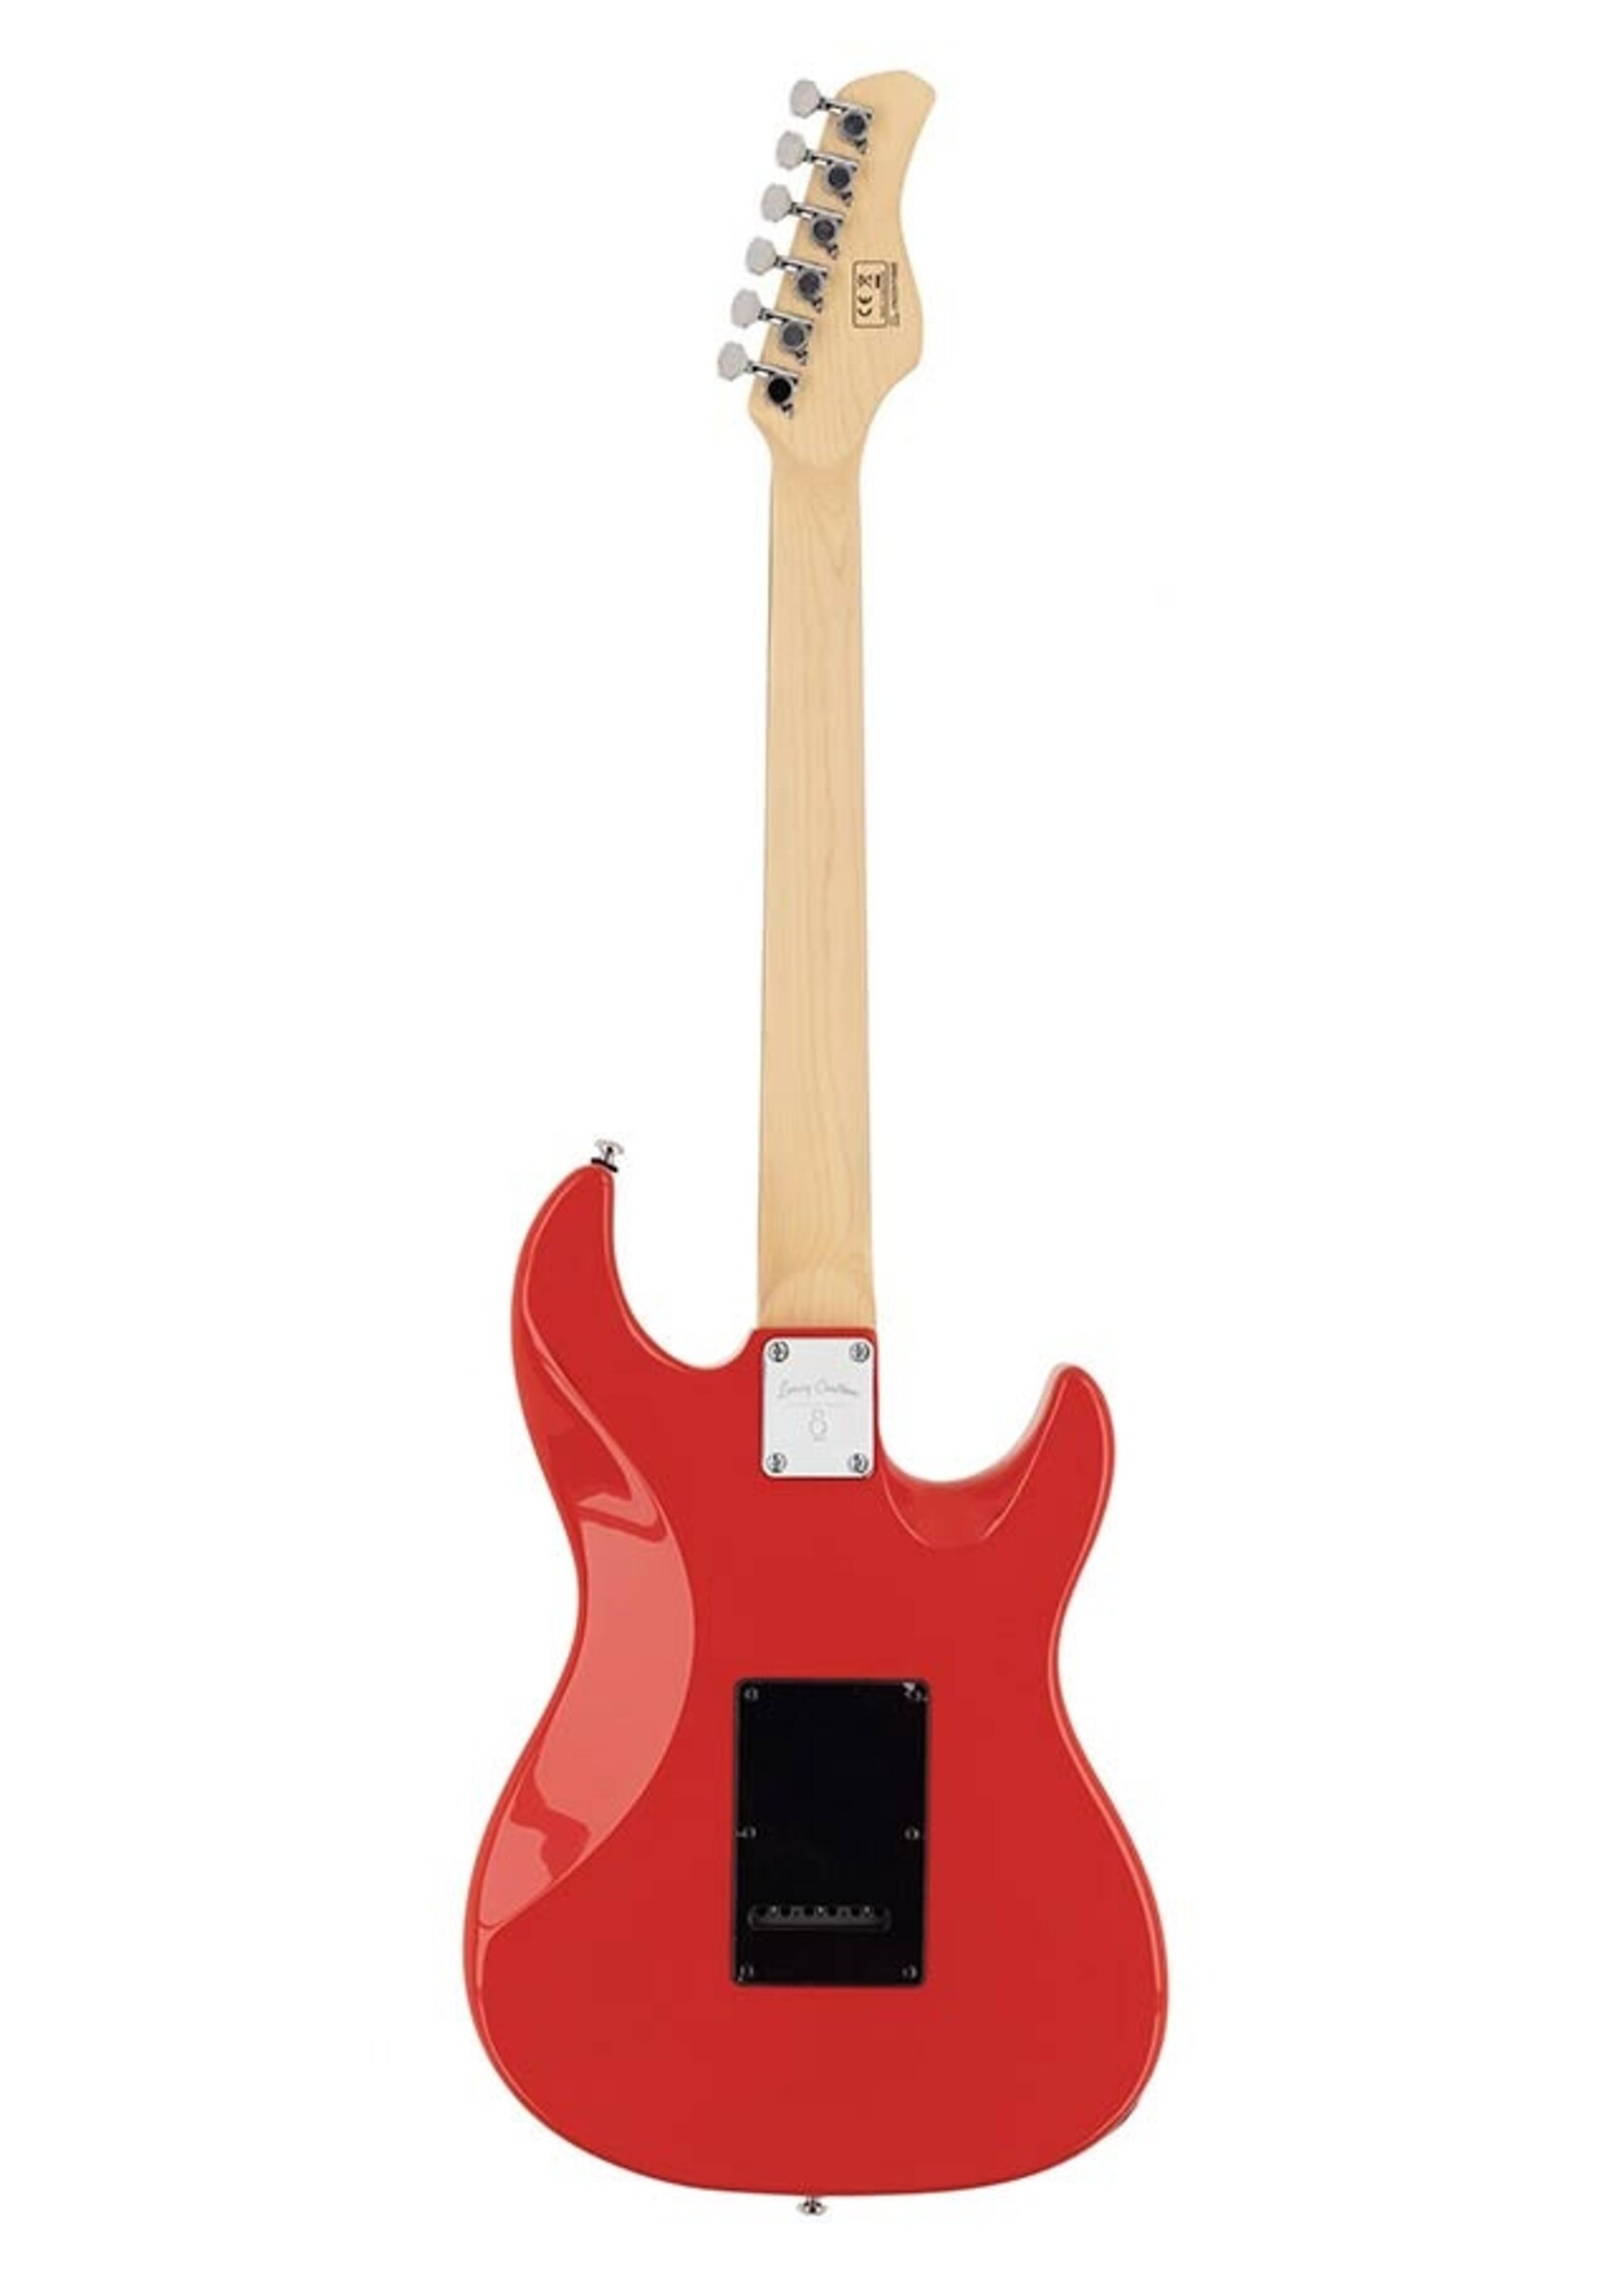 Sire Sire Guitars S3L/RD  S3 Series Larry Carlton lefty electric guitar S-style Red